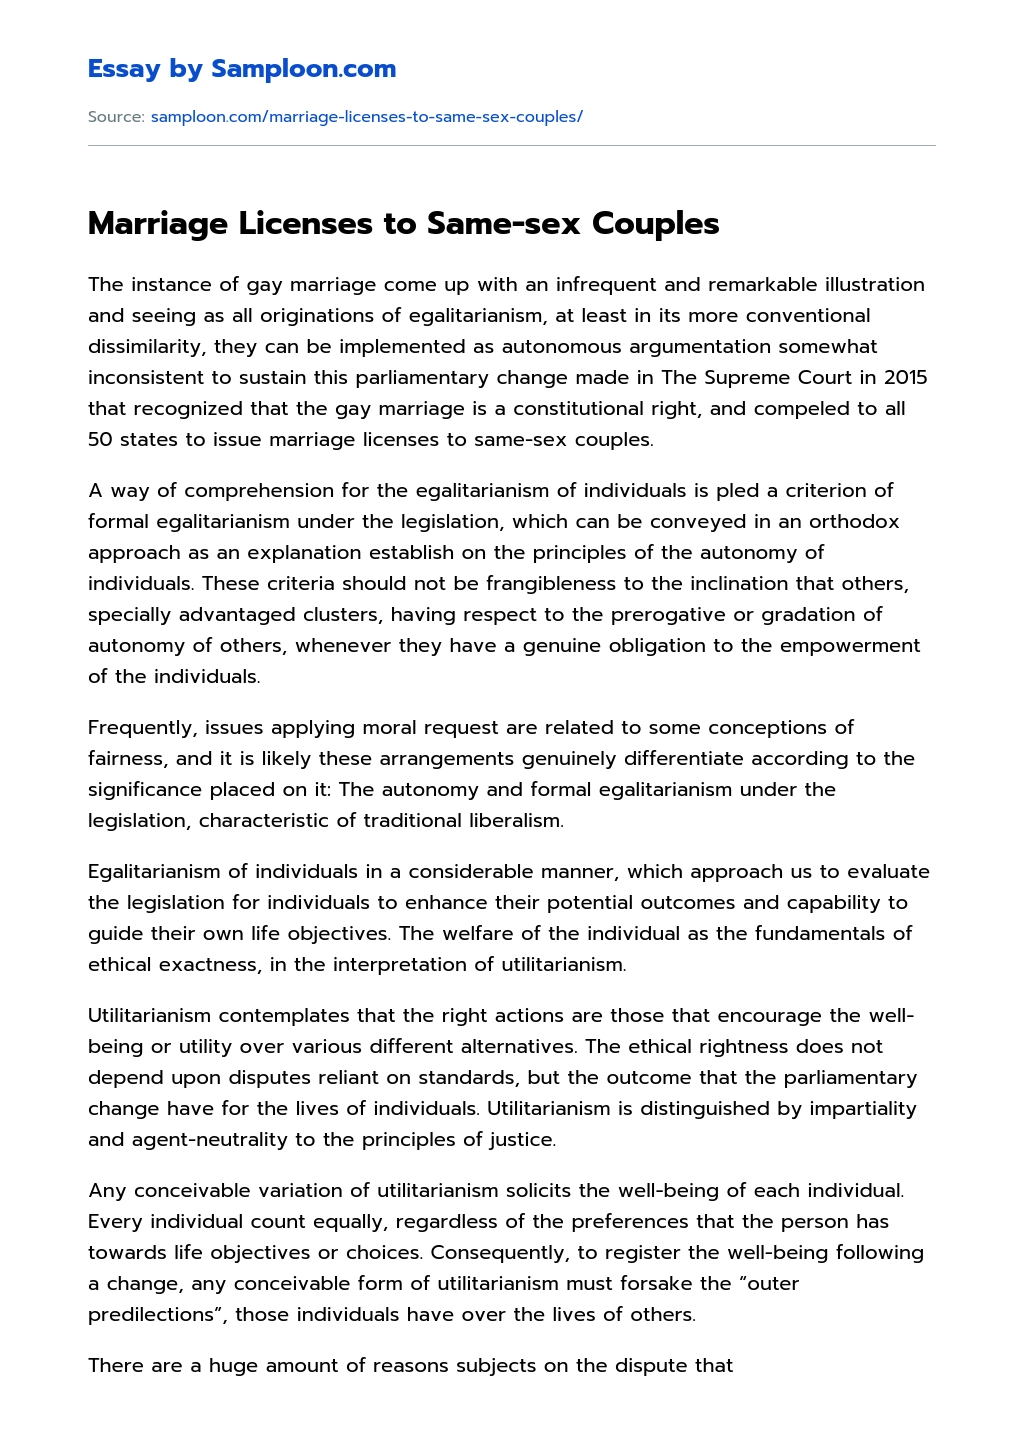 Marriage Licenses to Same-sex Couples essay